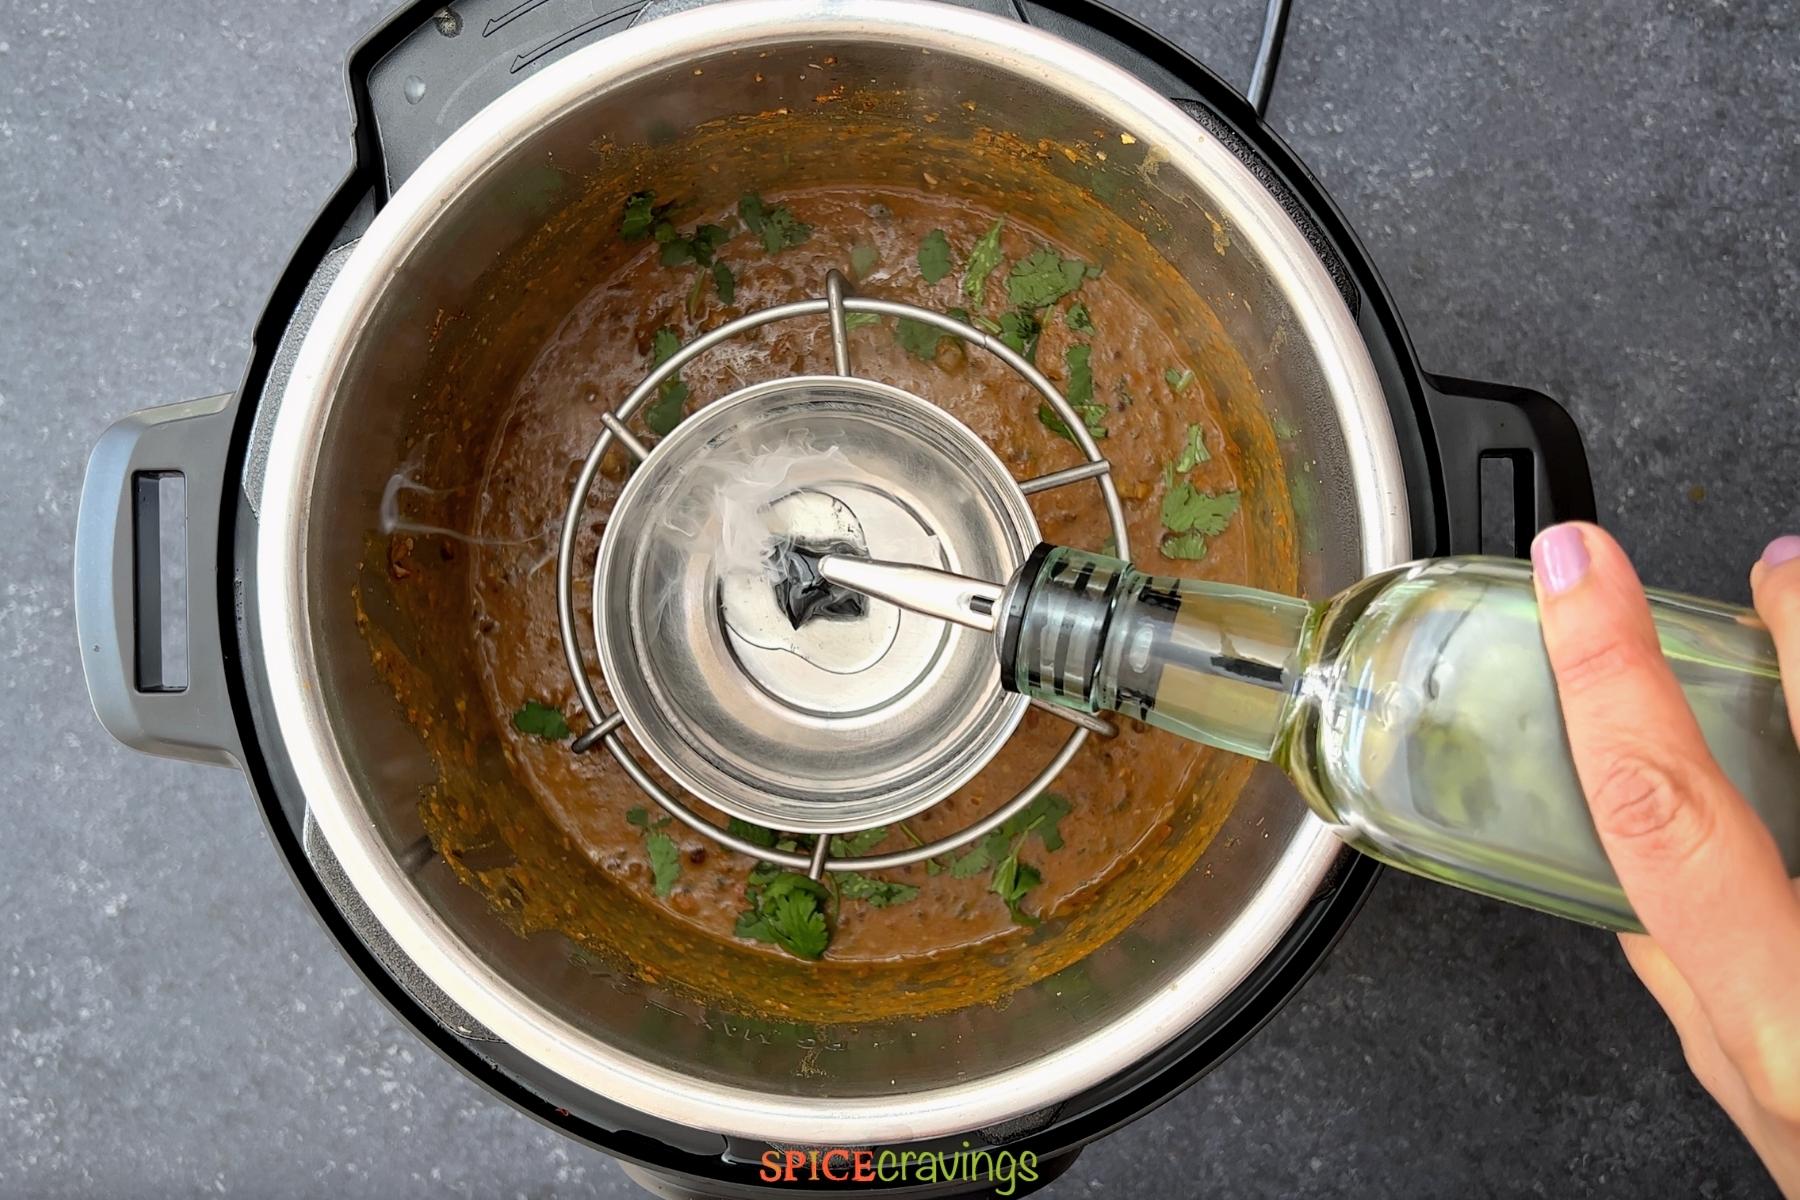 pouring oil from bottle over charcoal set in stainless steel bowl in instant pot